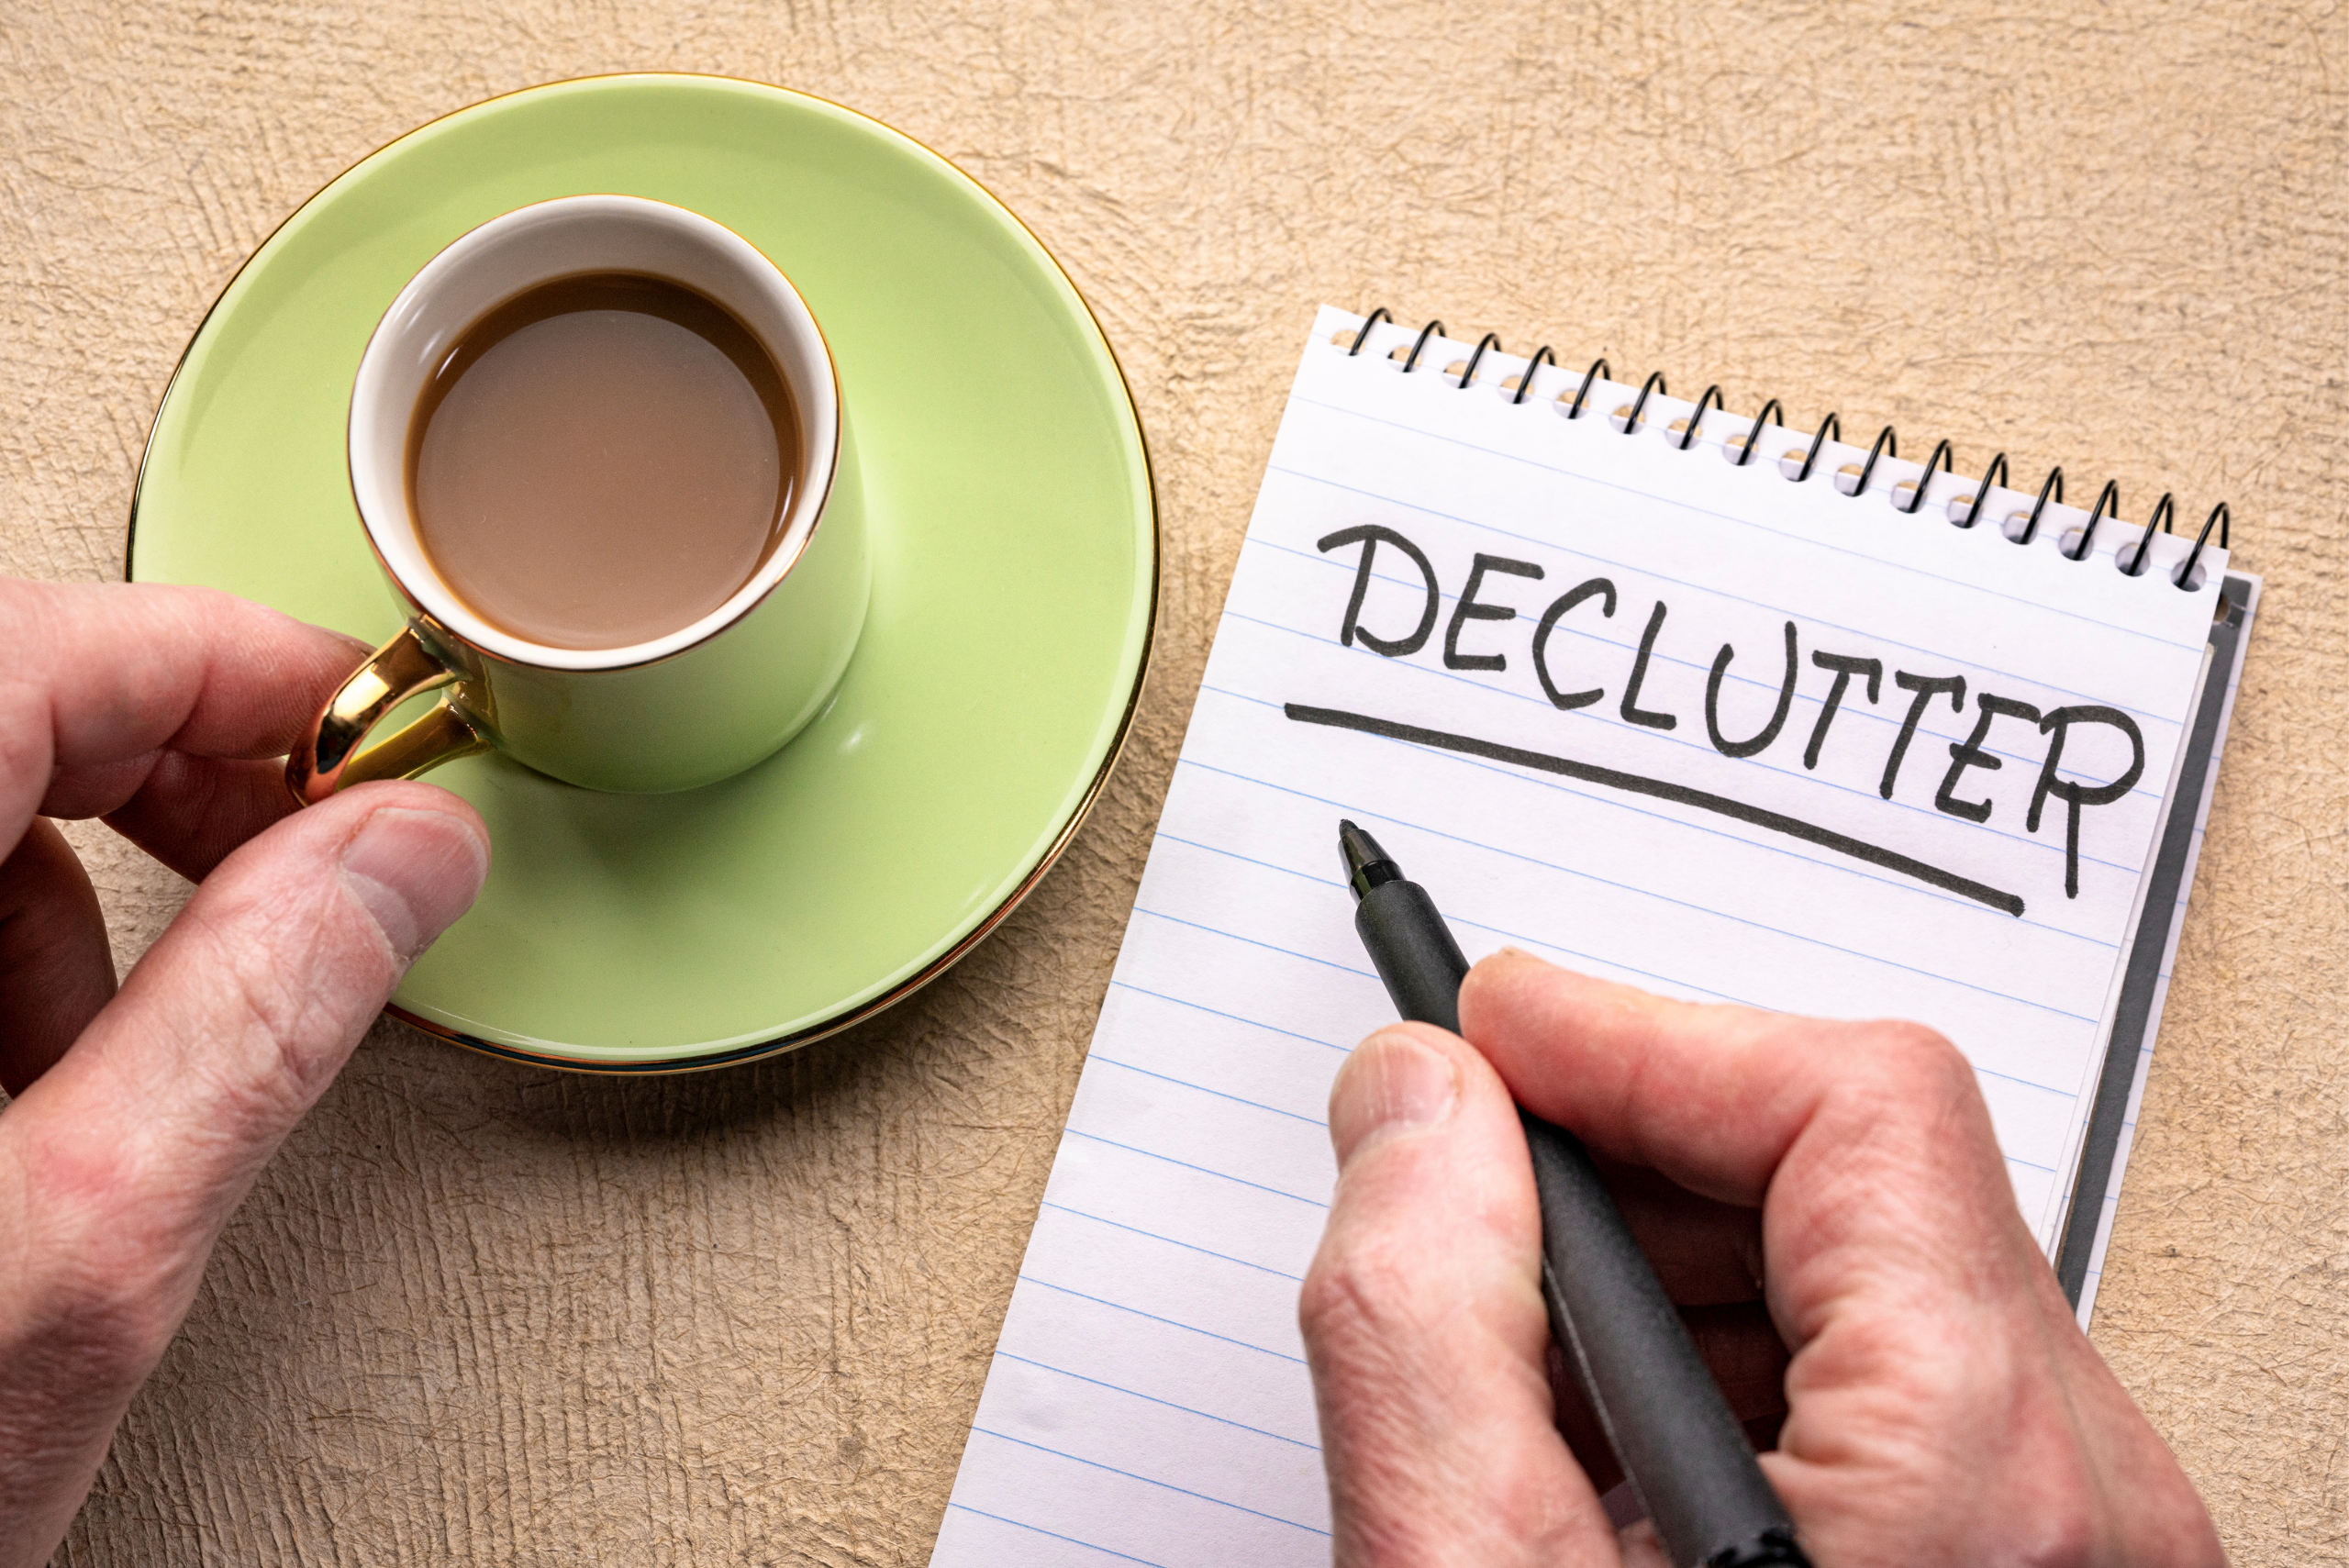 A coffee cup and notepad that reads "DECLUTTER"